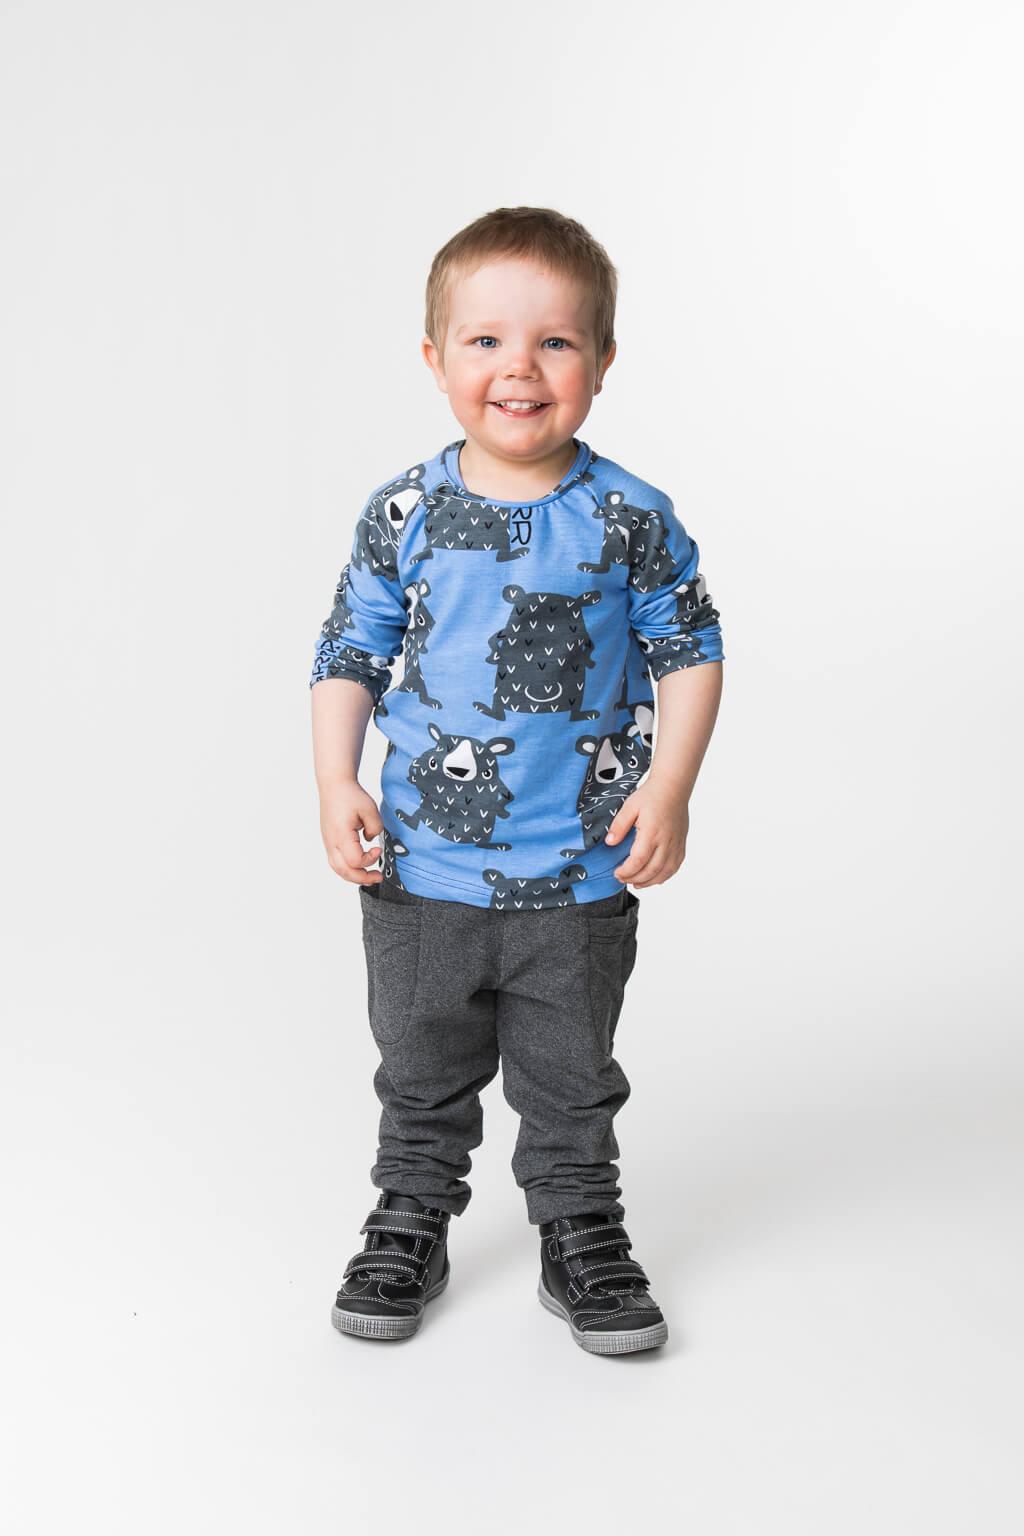 Introducing Children's Raglan Shirt (B C & D Sizes) 80-164 cm: A Stitch Of Comfort And Style